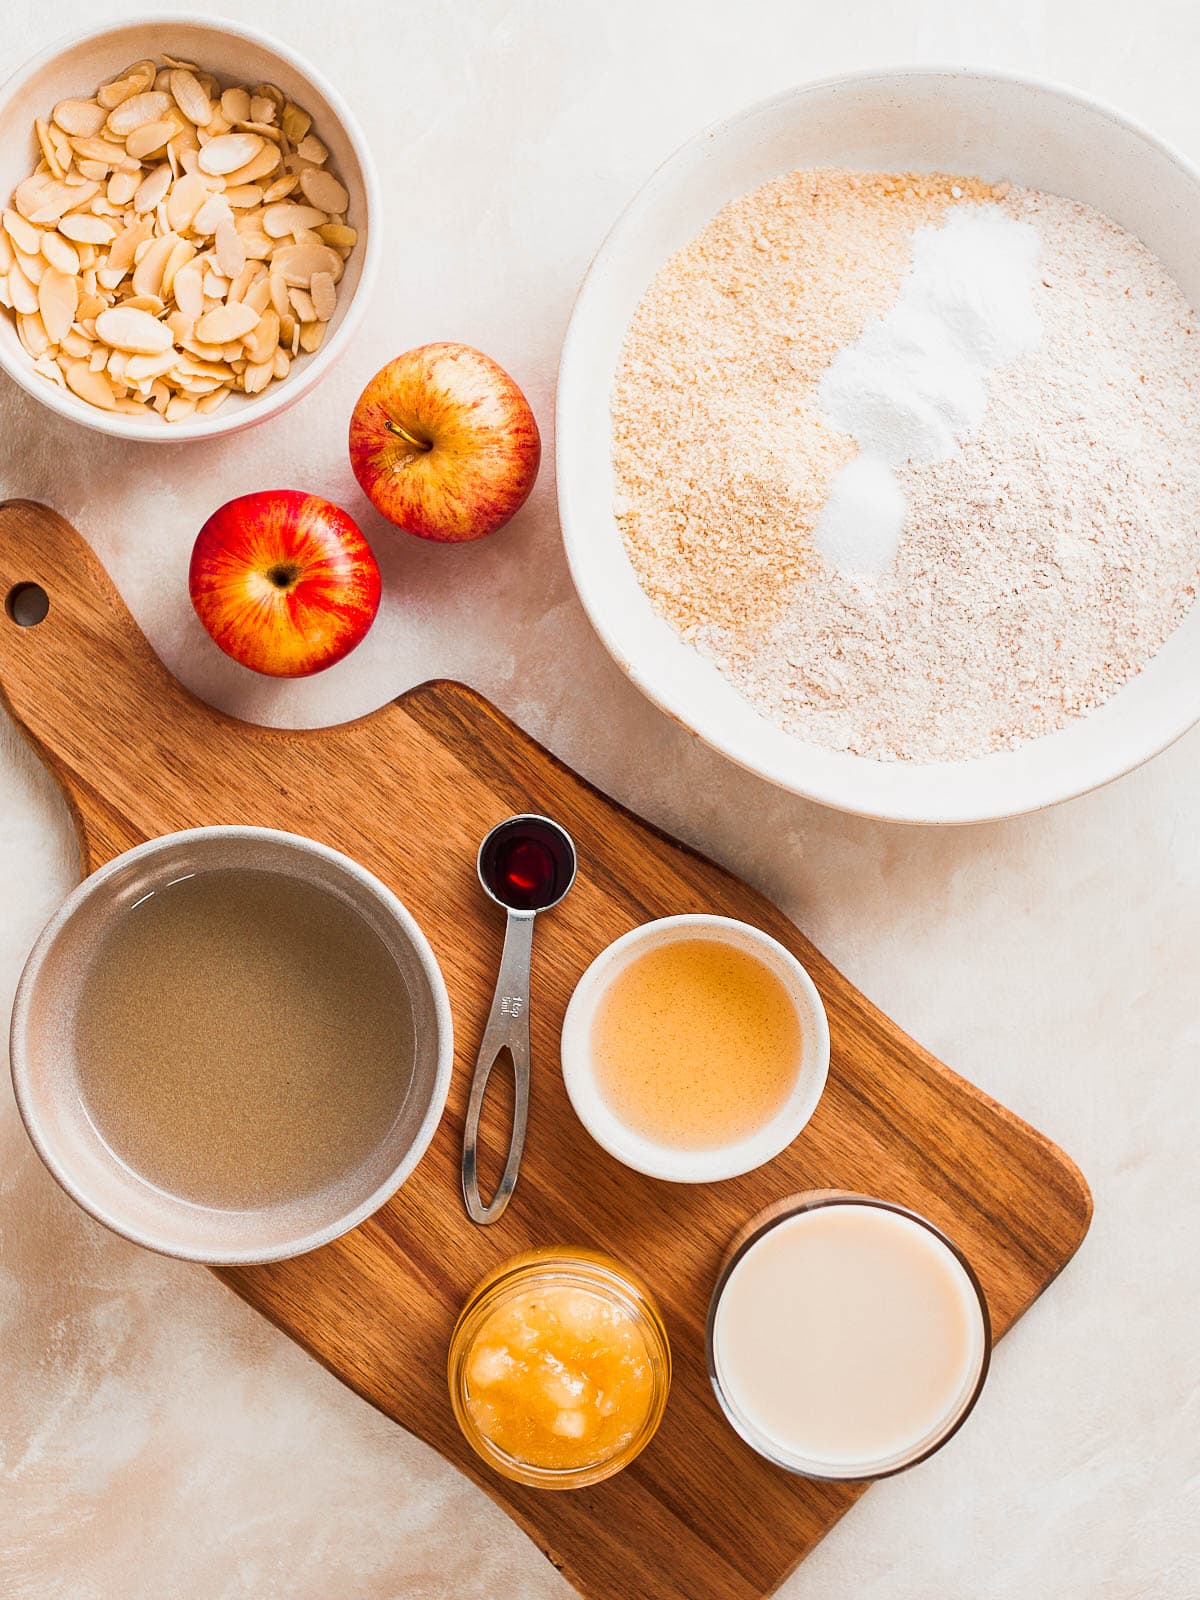 Ingredients for vegan baked pancakes with apple